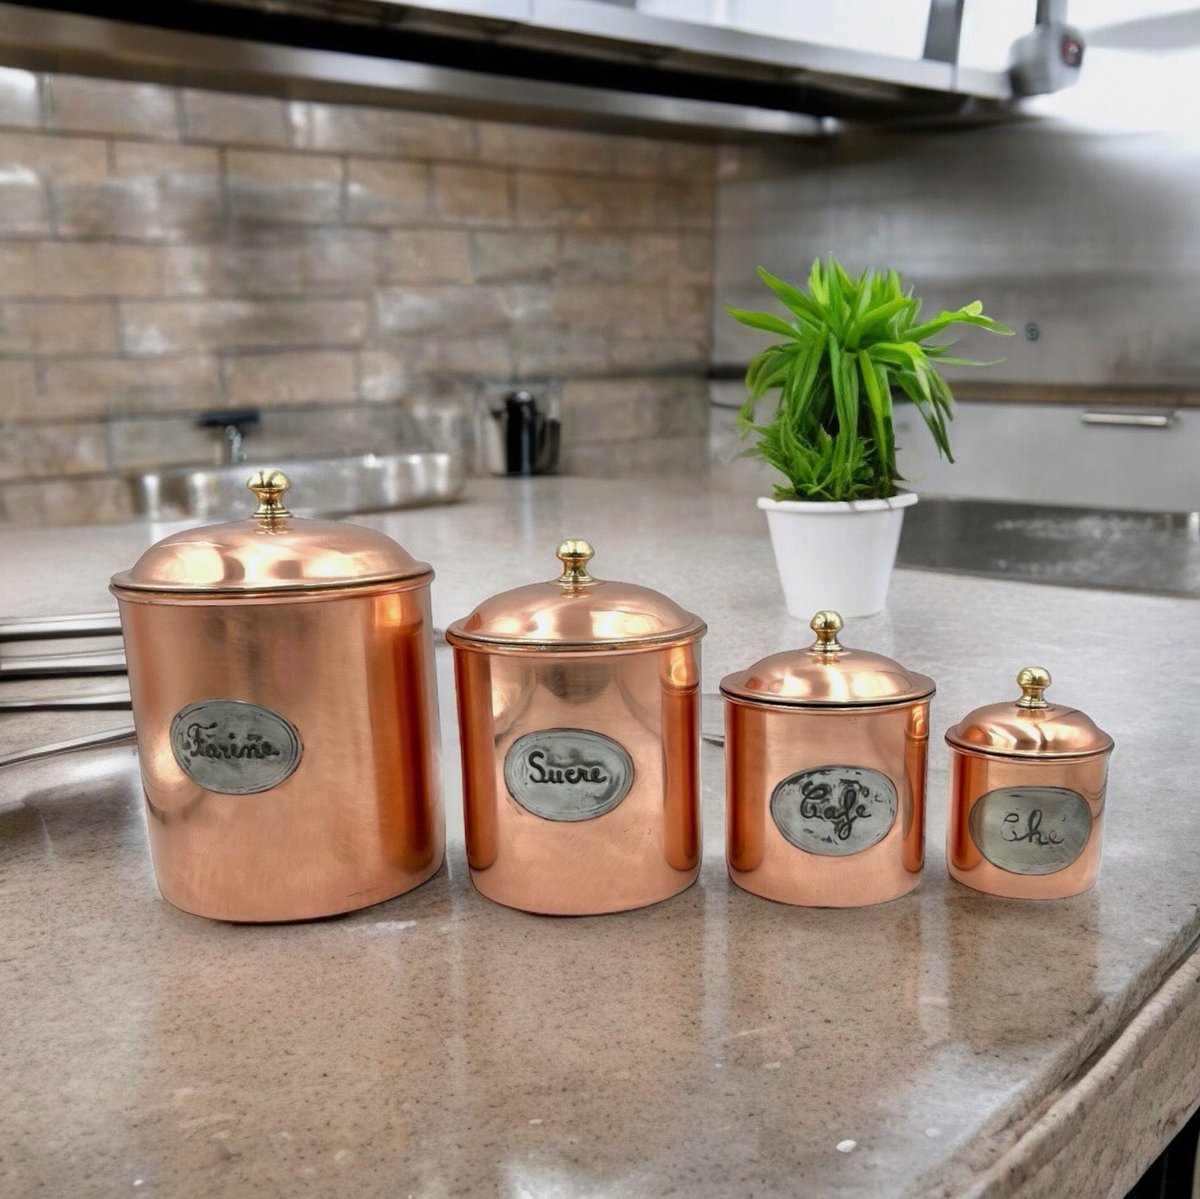 French copper canisters just listed in our Etsy shop #allthingsfrenchstore #etsy #buyvintage #buyingcontent allthingsfrenchstore.etsy.com/listing/168559…